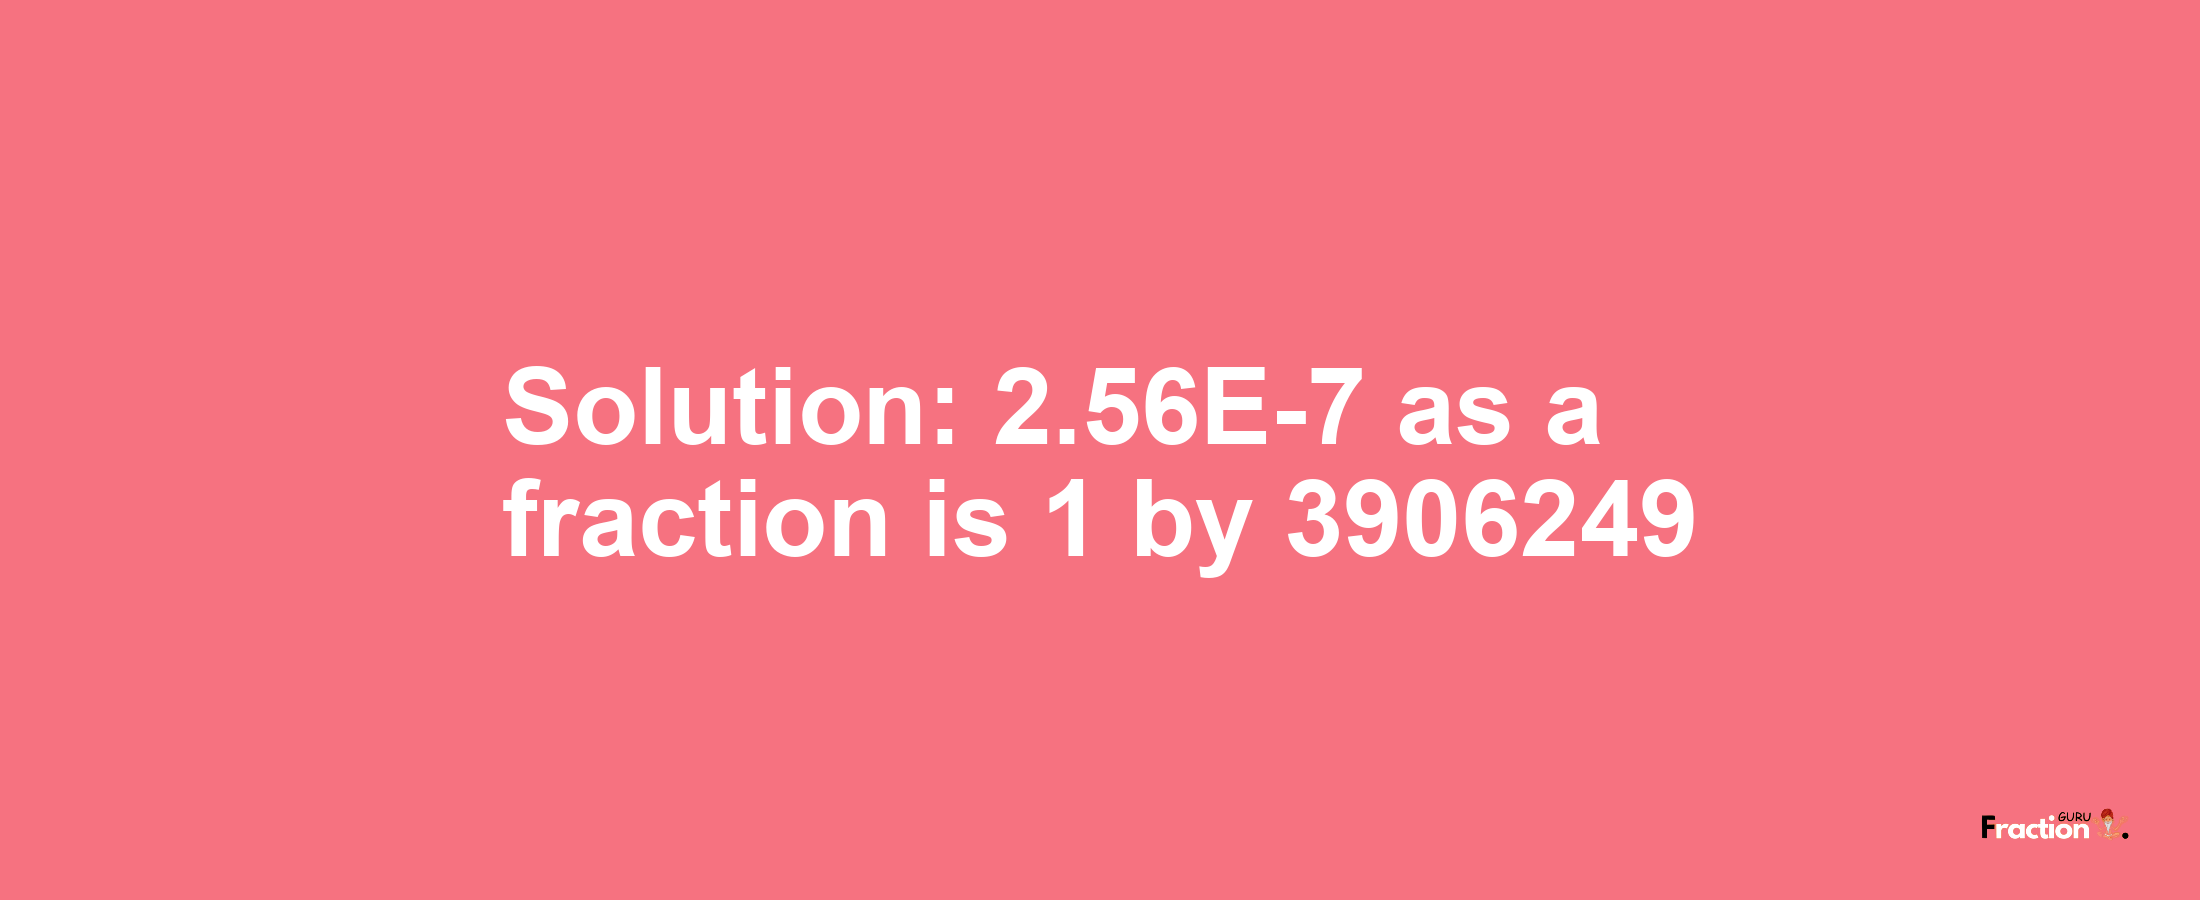 Solution:2.56E-7 as a fraction is 1/3906249